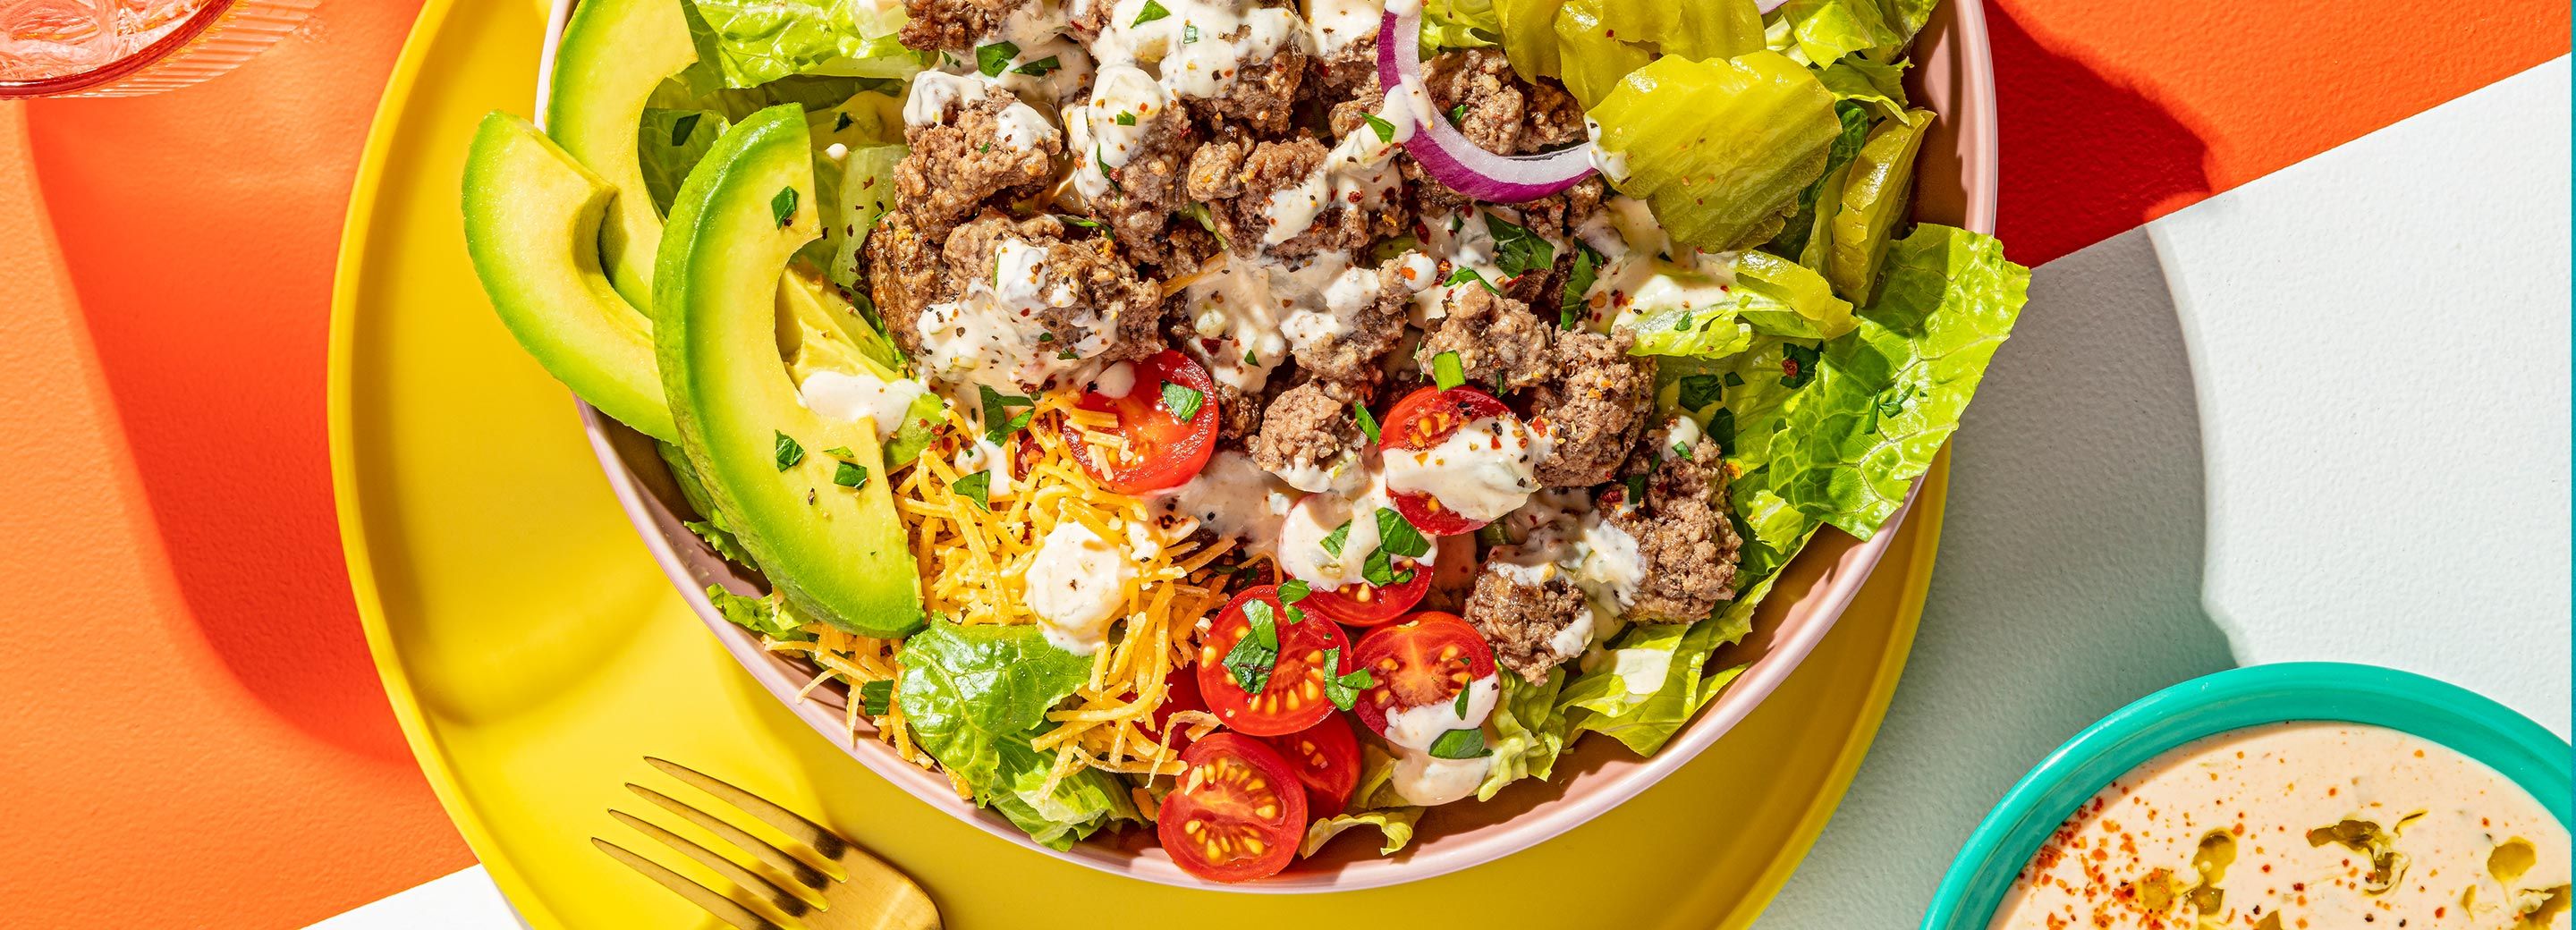 Zesty Burger Bowl with Special Sauce